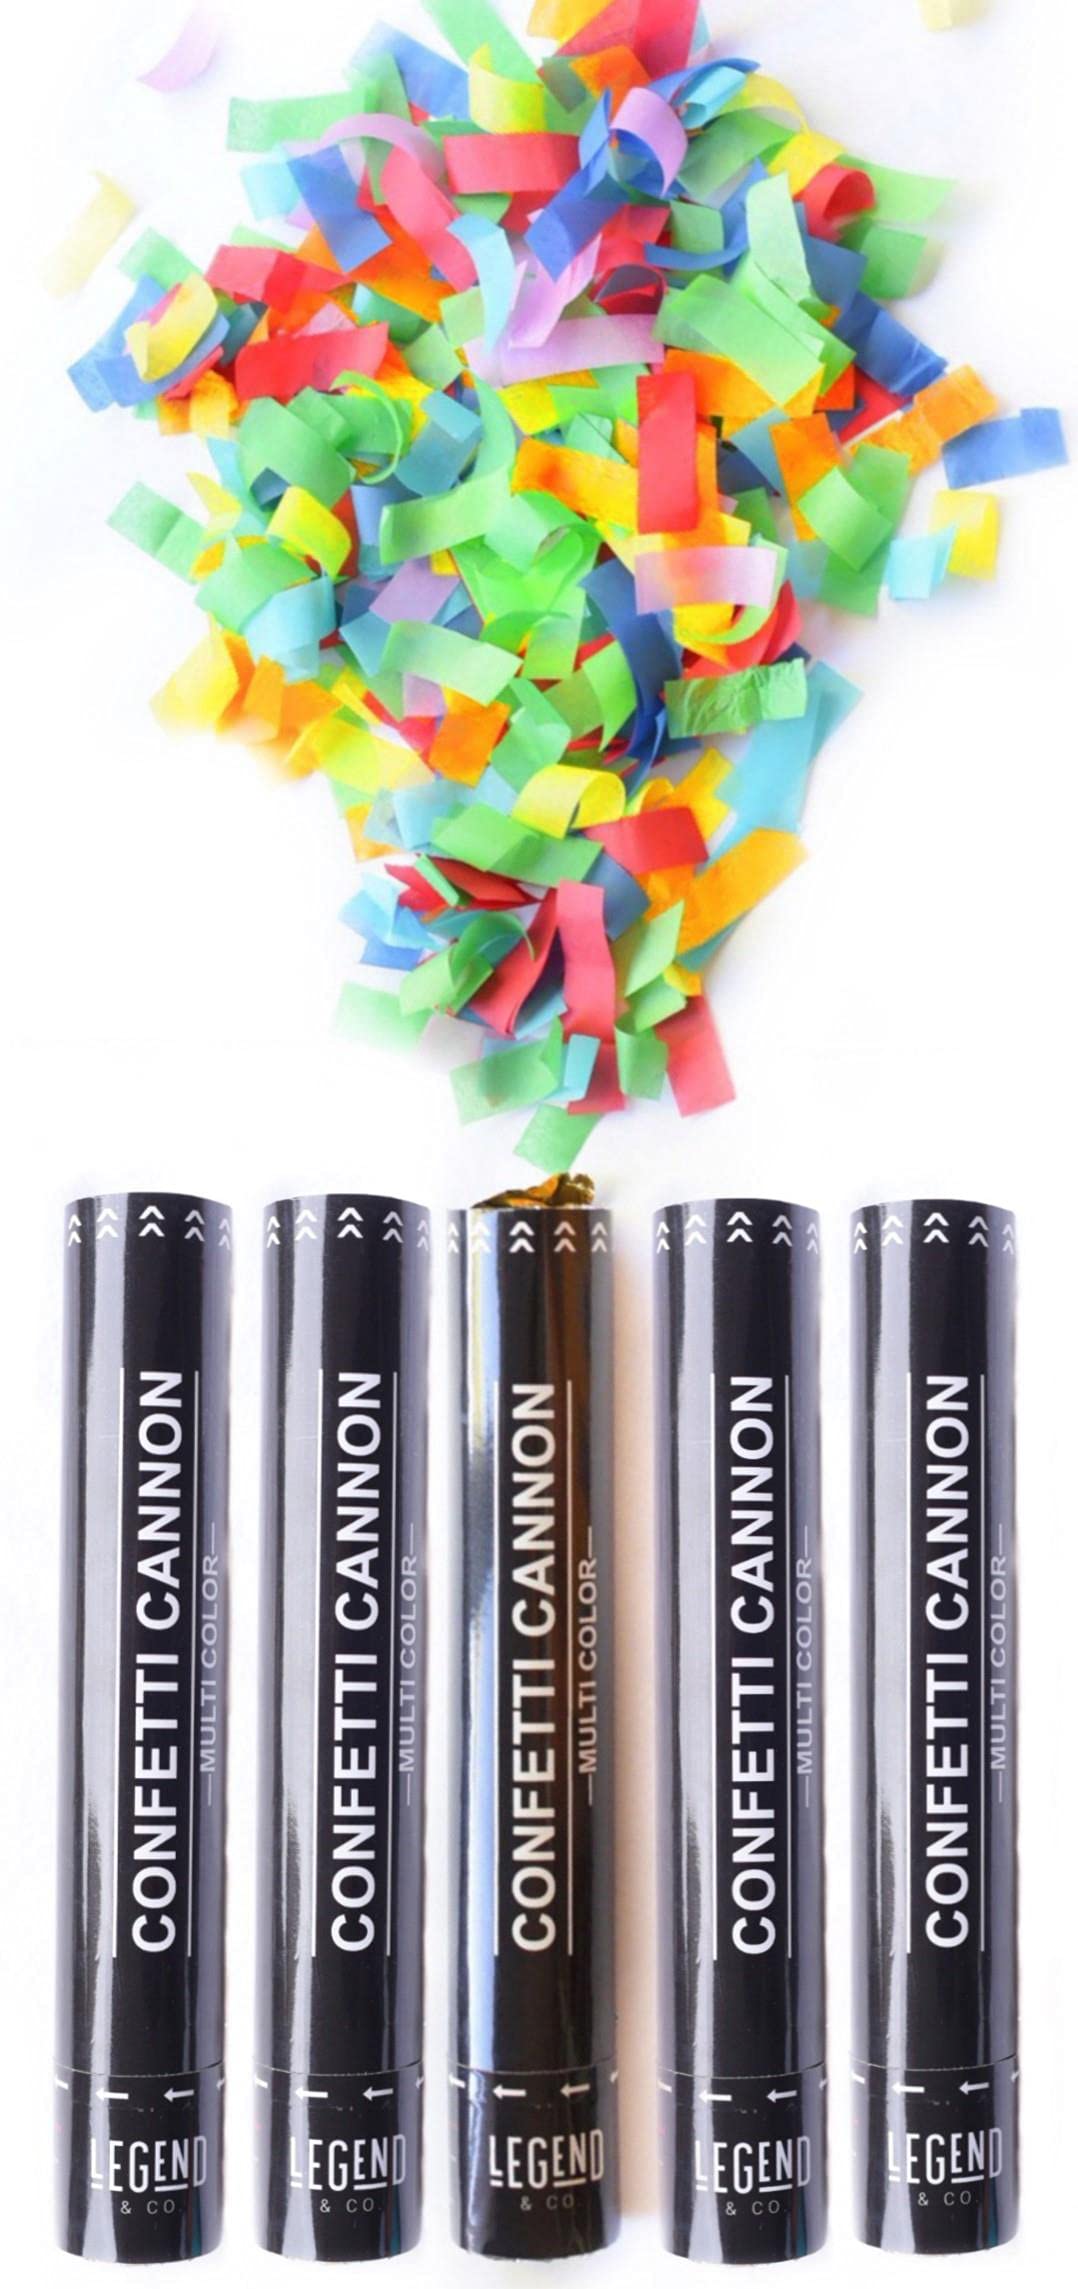 12 inch Confetti Cannons Multicolor | Biodegradable Confetti & Air Powered | Launches 20-25ft | Celebrations, New Year's Eve, Birthdays and Weddings (5 Pack)